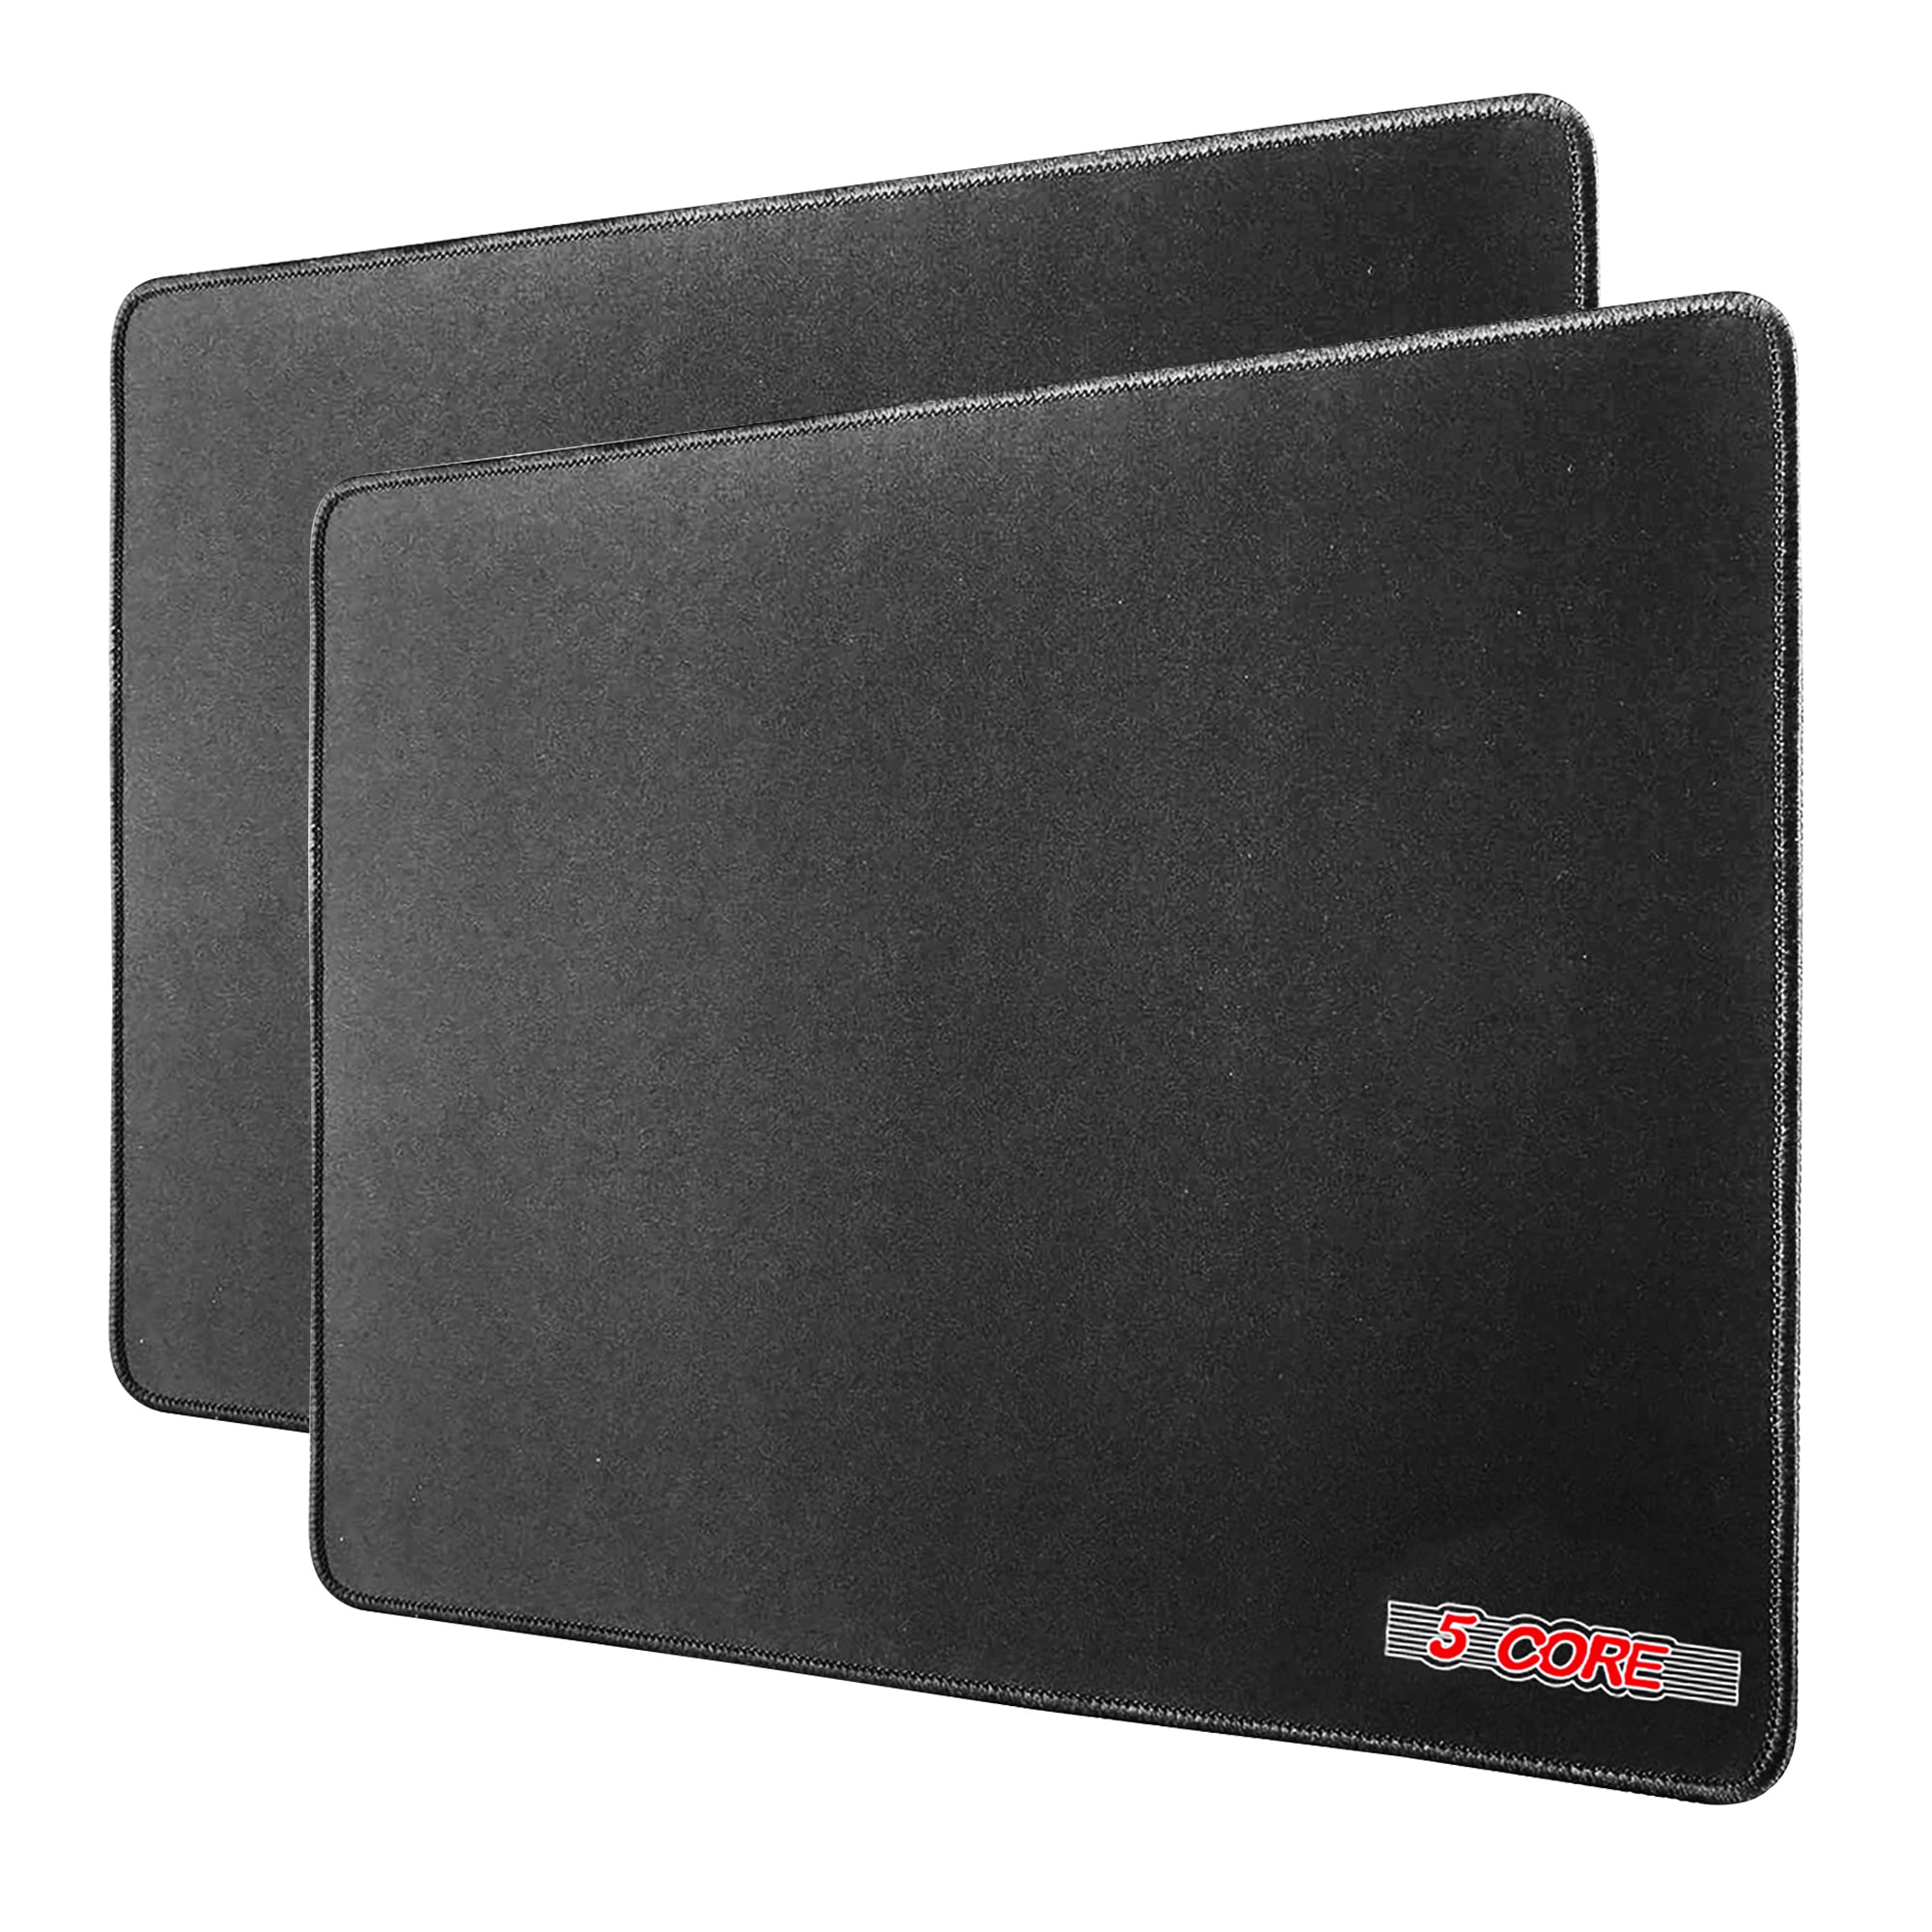 5 Core Gaming Mouse Pad Standard Size with Durable Stitched Edges and Non-Slip Rubber Base Large Gaming Mouse Pads Laptop PC Computer -MP 3X3 2Pair